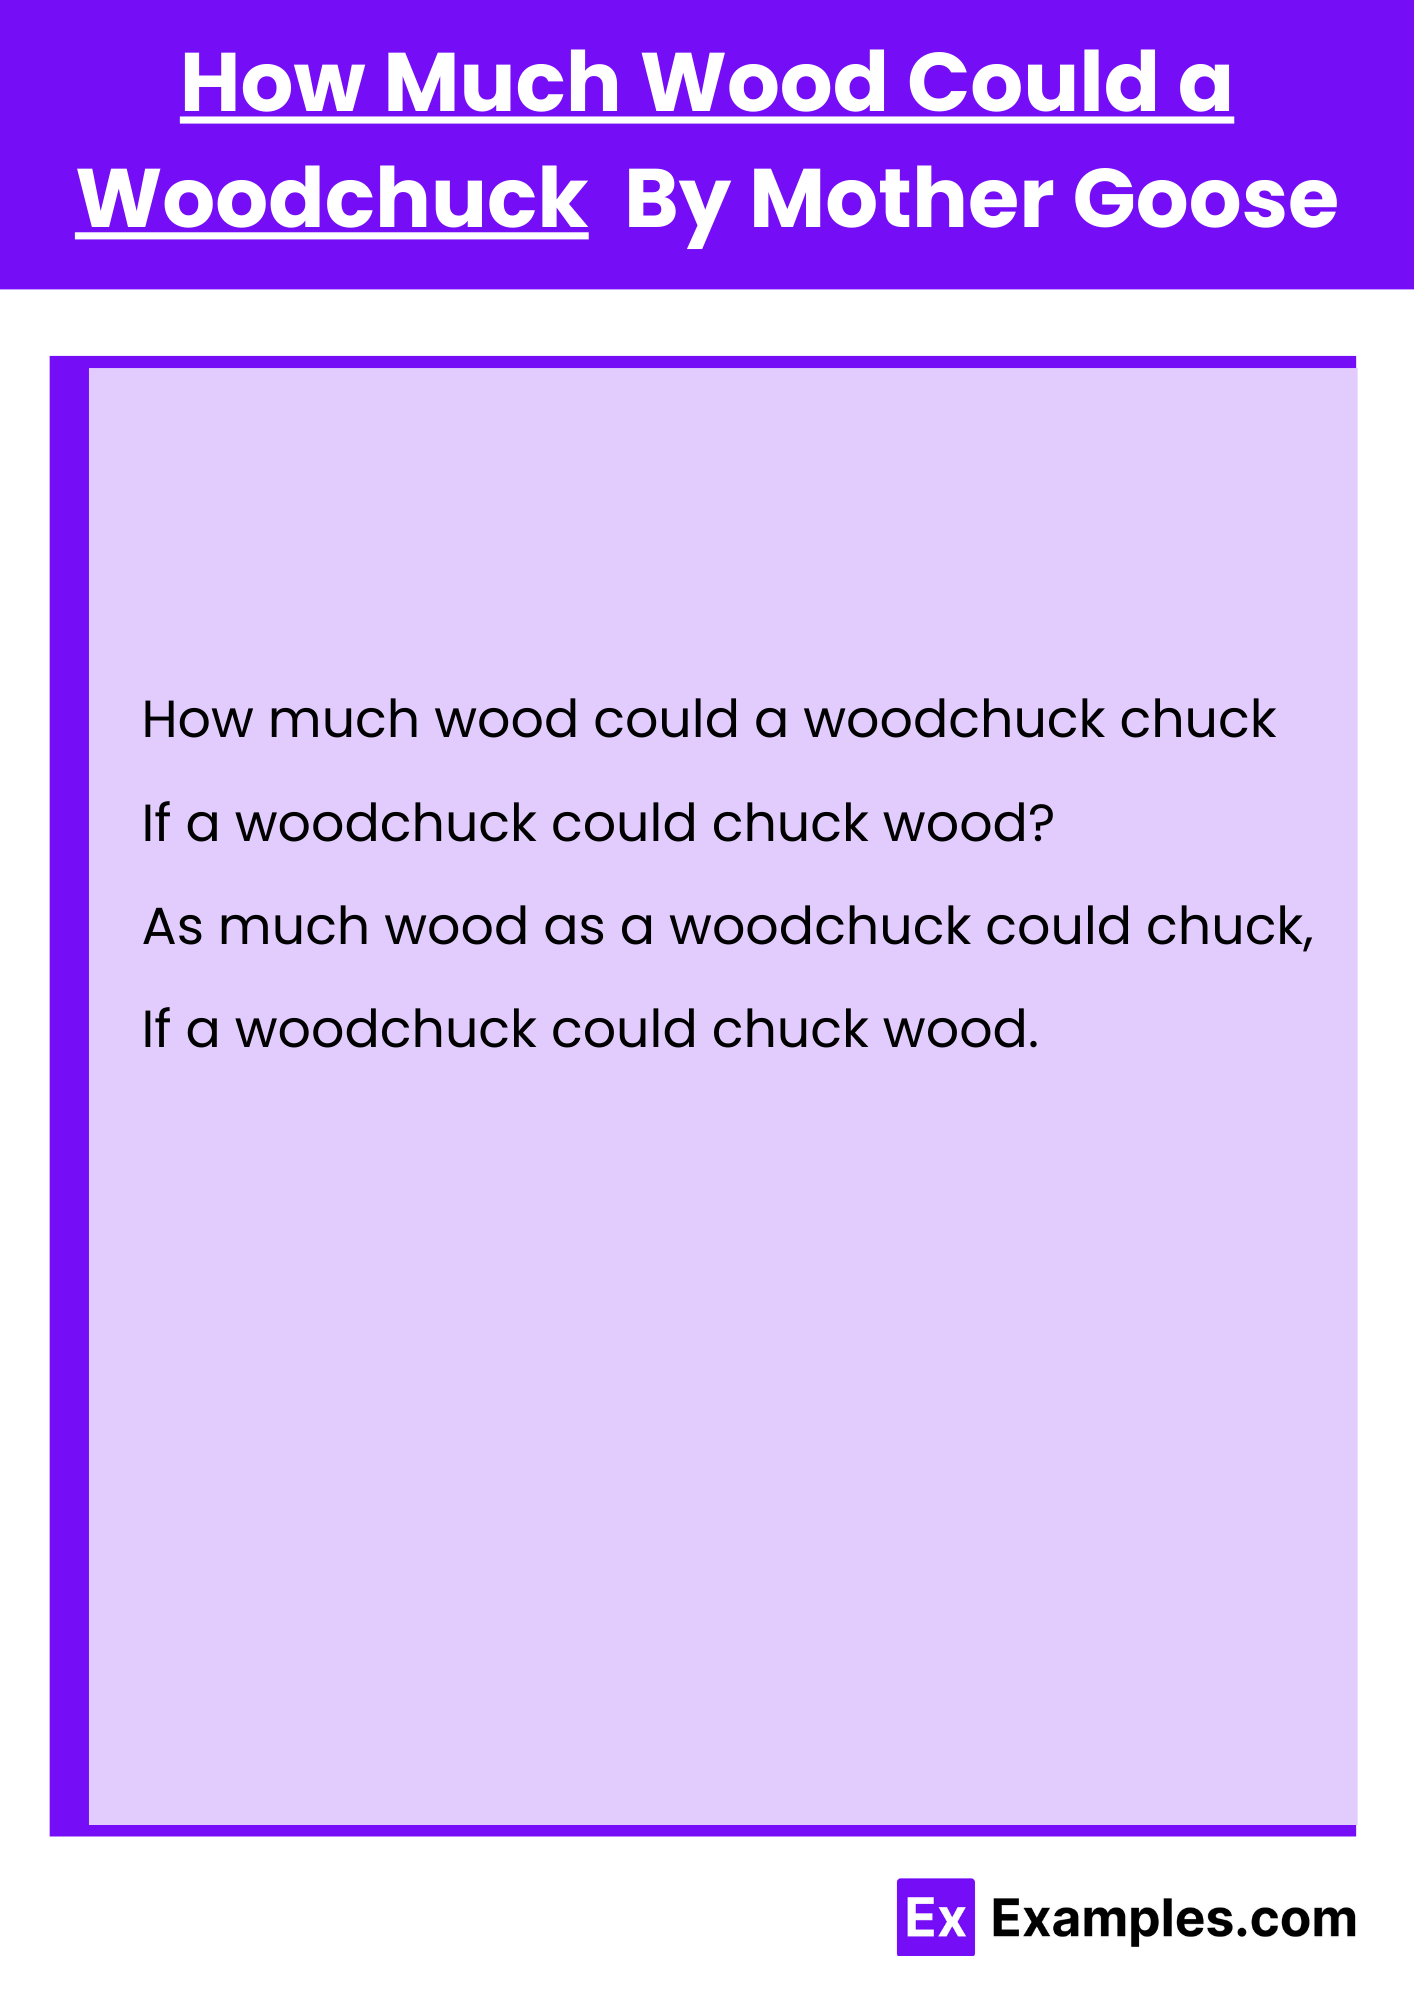 How Much Wood Could a Woodchuck By Mother Goose